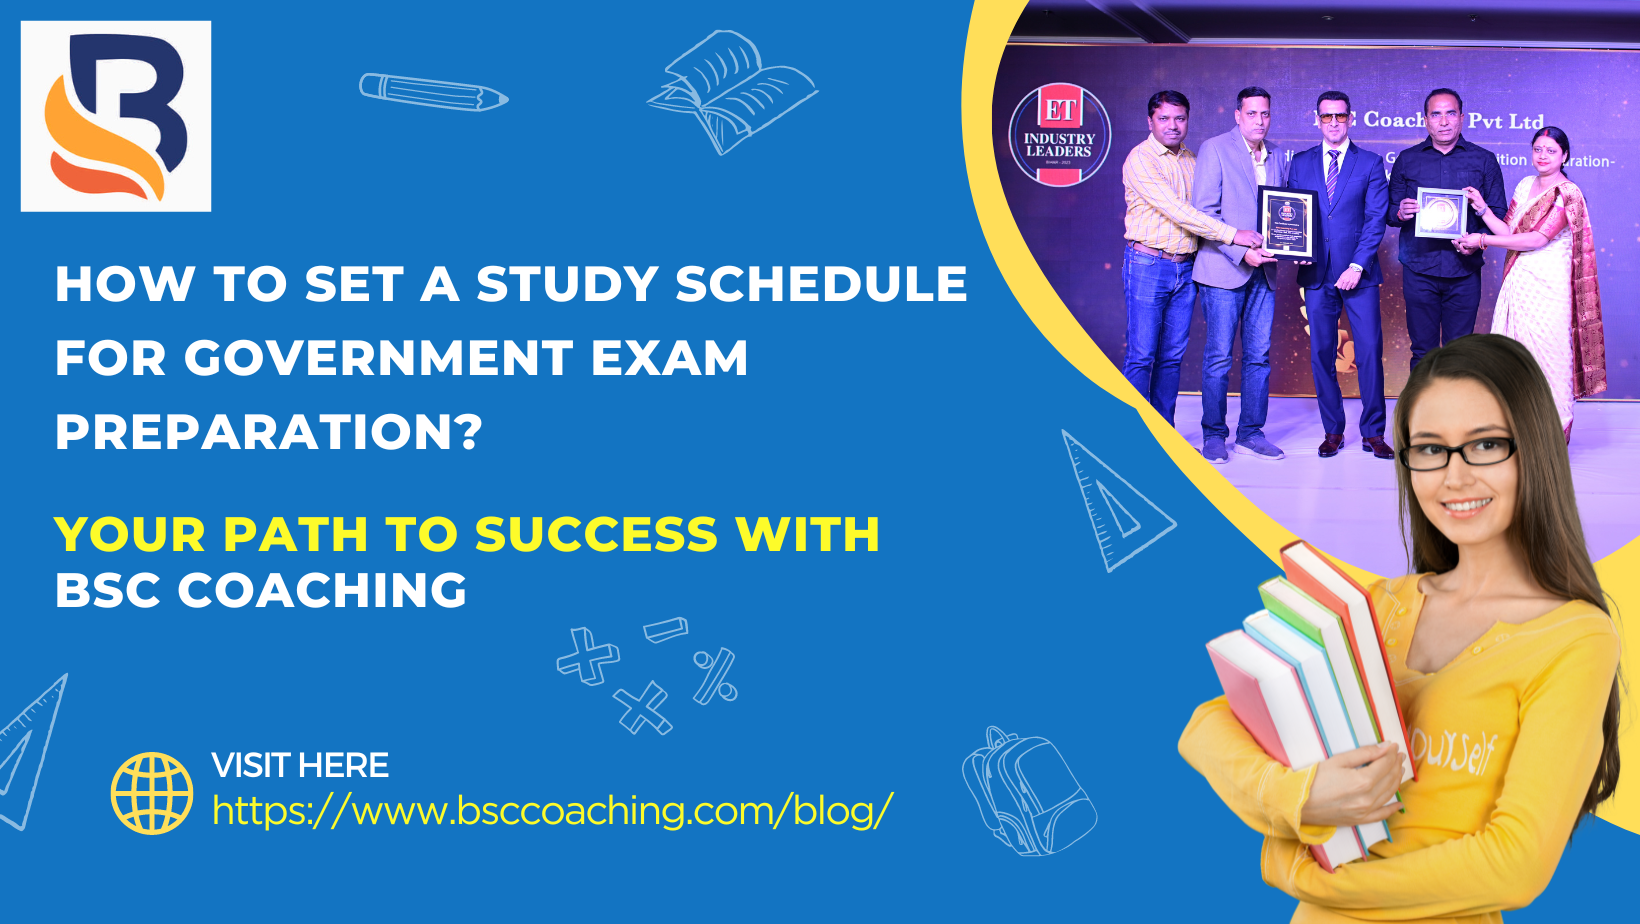 How to Set a Study Schedule for Government Exam Preparation? Your Path to Success with BSC Coaching!